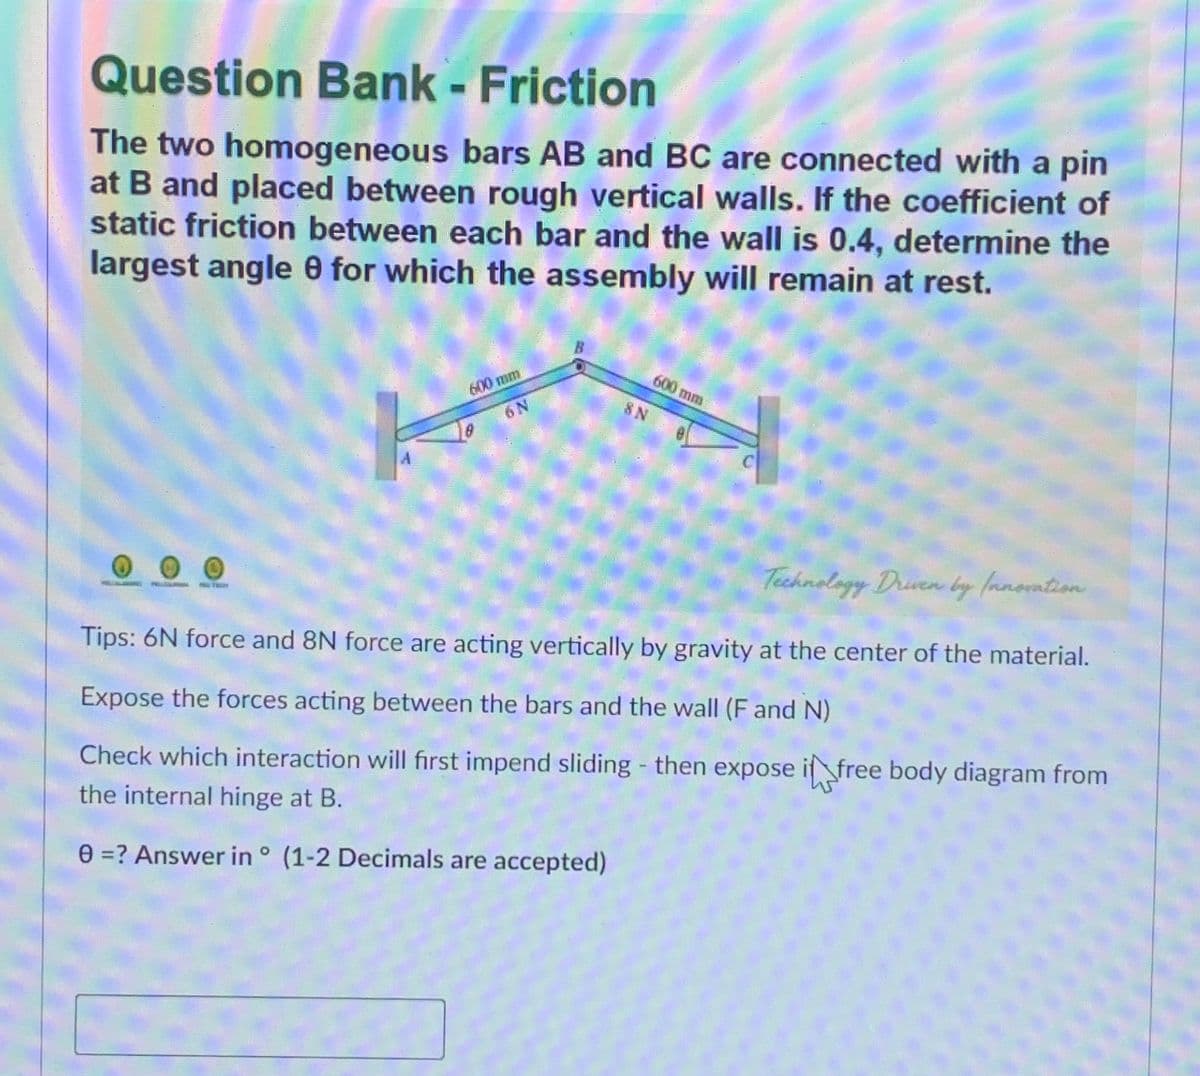 Question Bank - Friction
The two homogeneous bars AB and BC are connected with a pin
at B and placed between rough vertical walls. If the coefficient of
static friction between each bar and the wall is 0.4, determine the
largest angle 0 for which the assembly will remain at rest.
600 mm
6N
600 mm
8 N
A.
Technology Druen by fanoation
Tips: 6N force and 8N force are acting vertically by gravity at the center of the material.
Expose the forces acting between the bars and the wall (F and N)
Check which interaction will first impend sliding - then expose if free body diagram from
the internal hinge at B.
e =? Answer in ° (1-2 Decimals are accepted)
